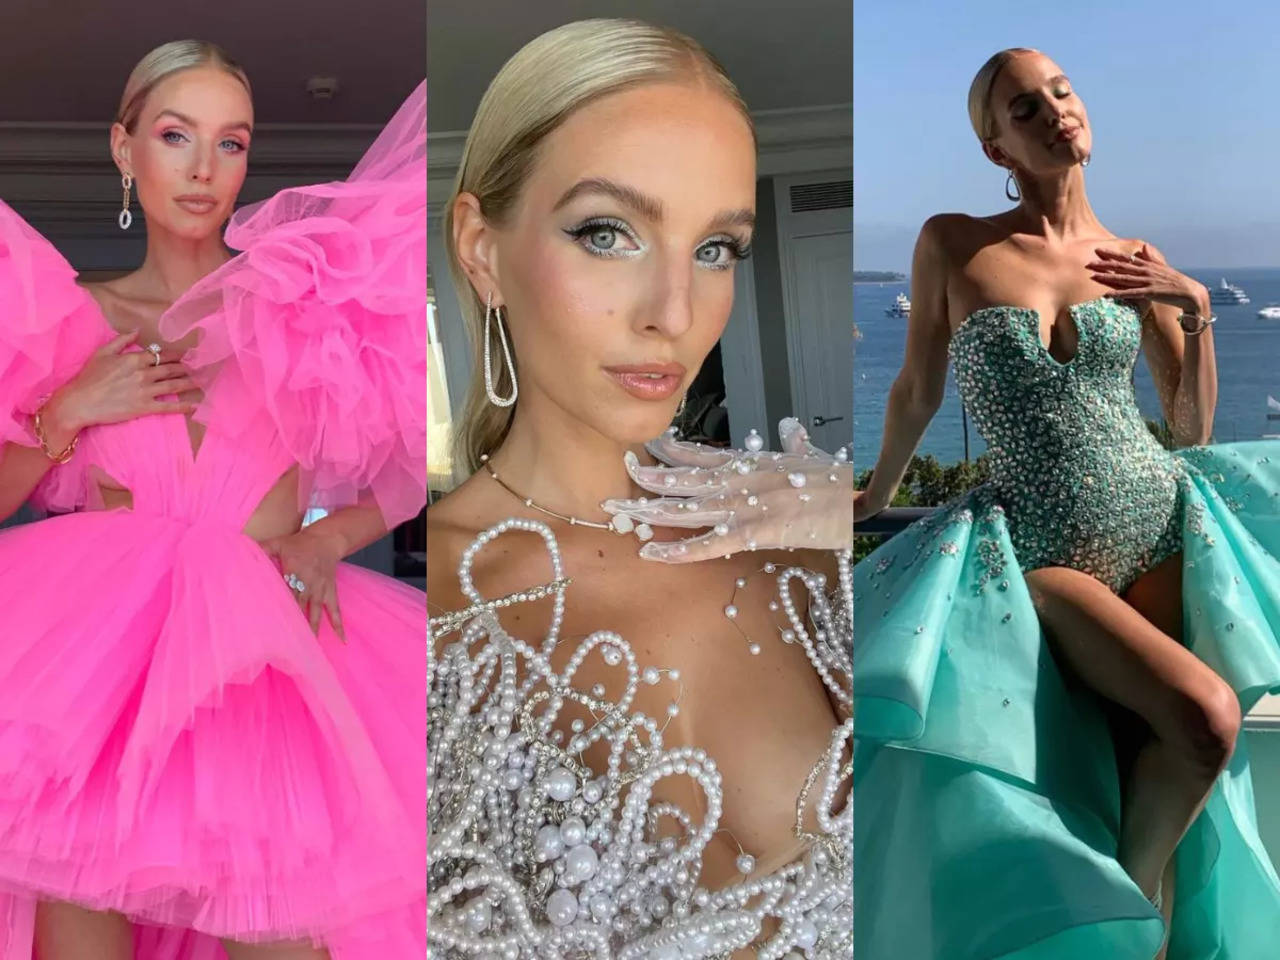 The best of beauty looks from the Cannes Film Festival 2022